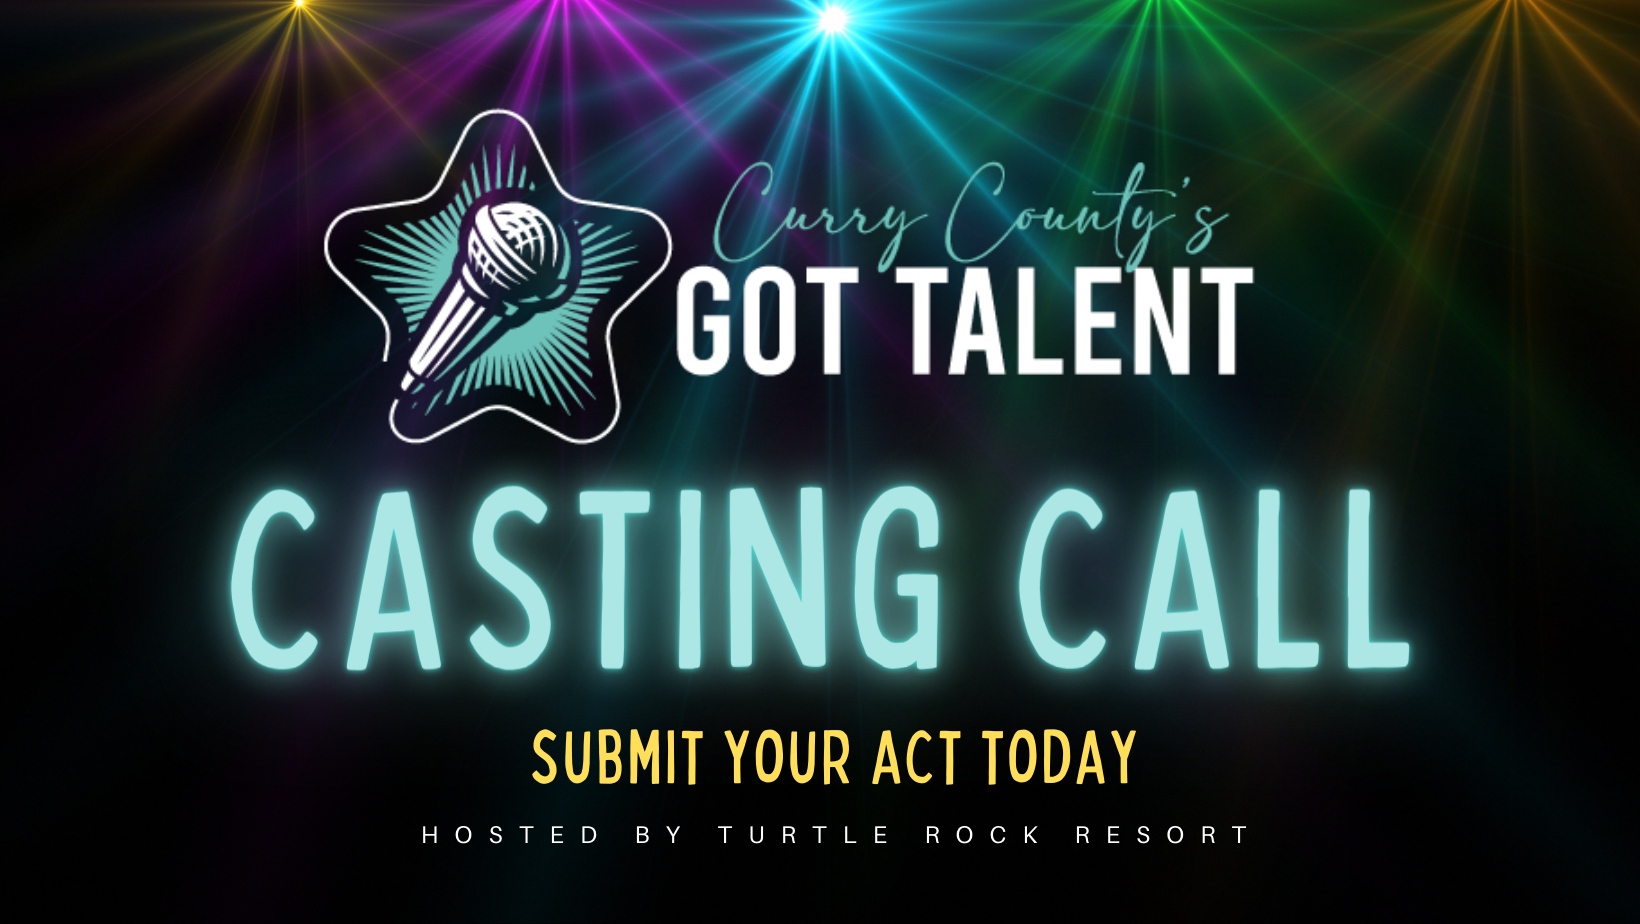 Curry County's Got Talent